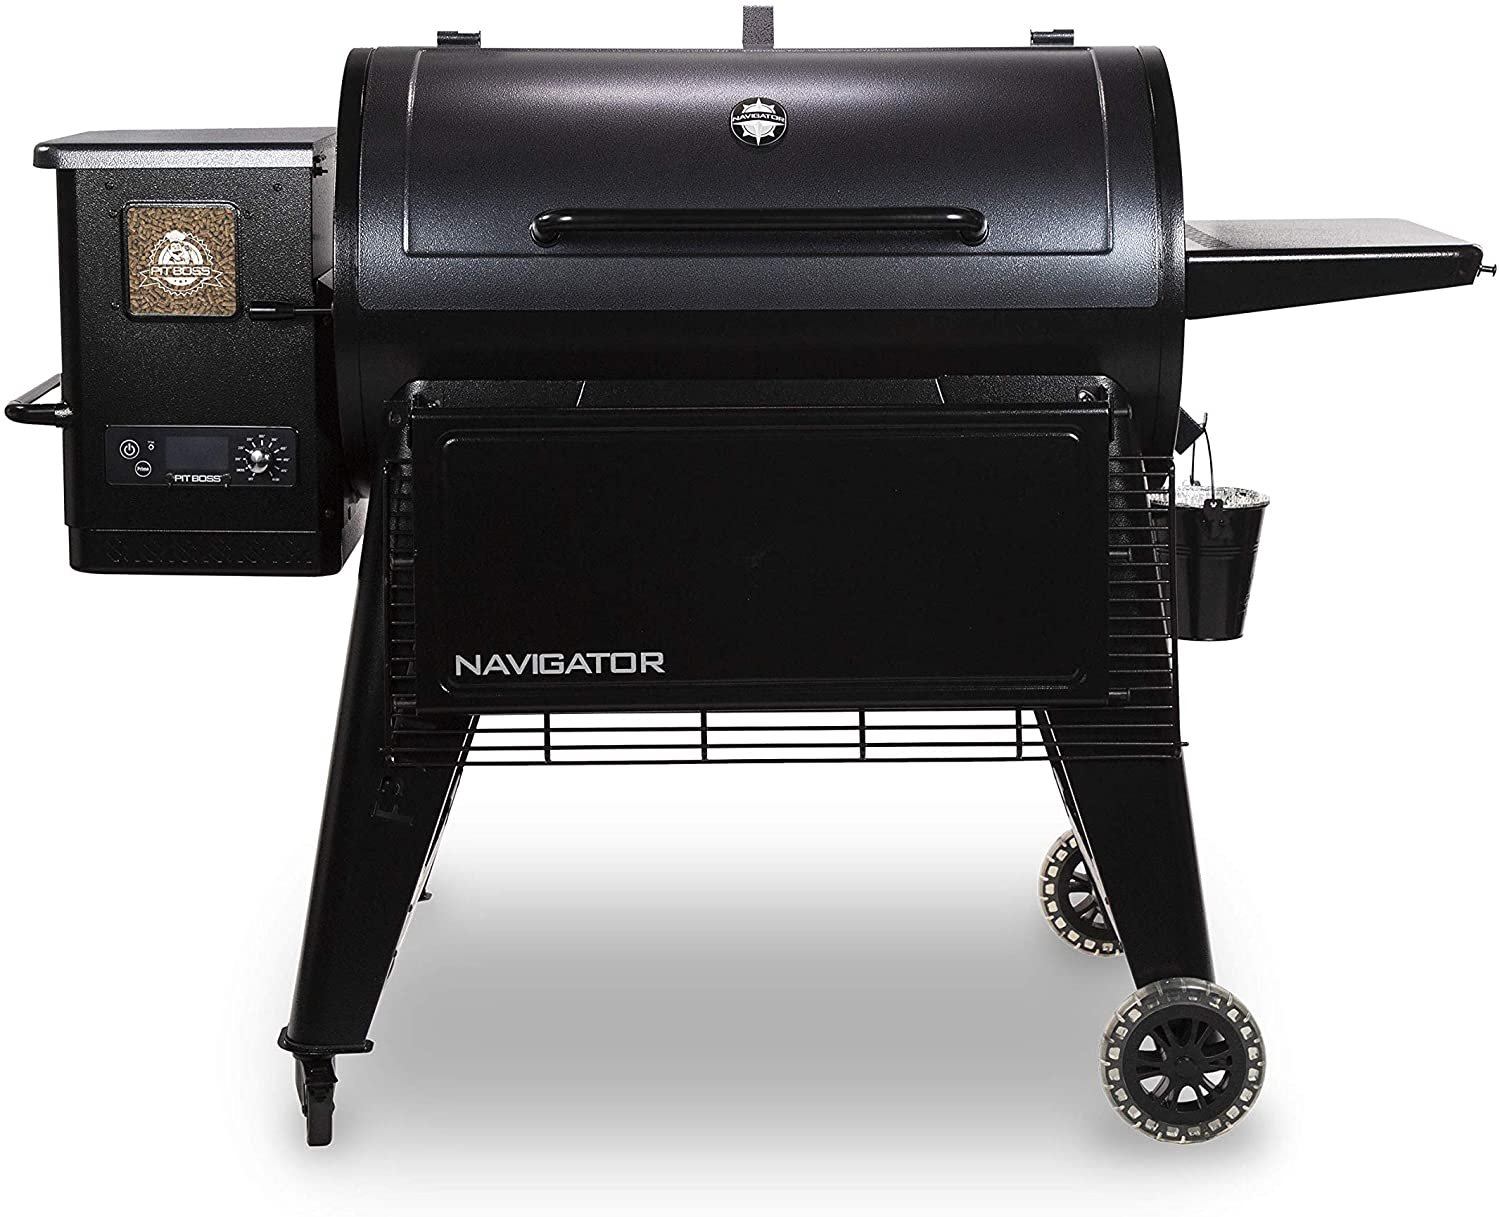 Pit Boss 1150 Wood Pellet Grill with Cover - image 1 of 8